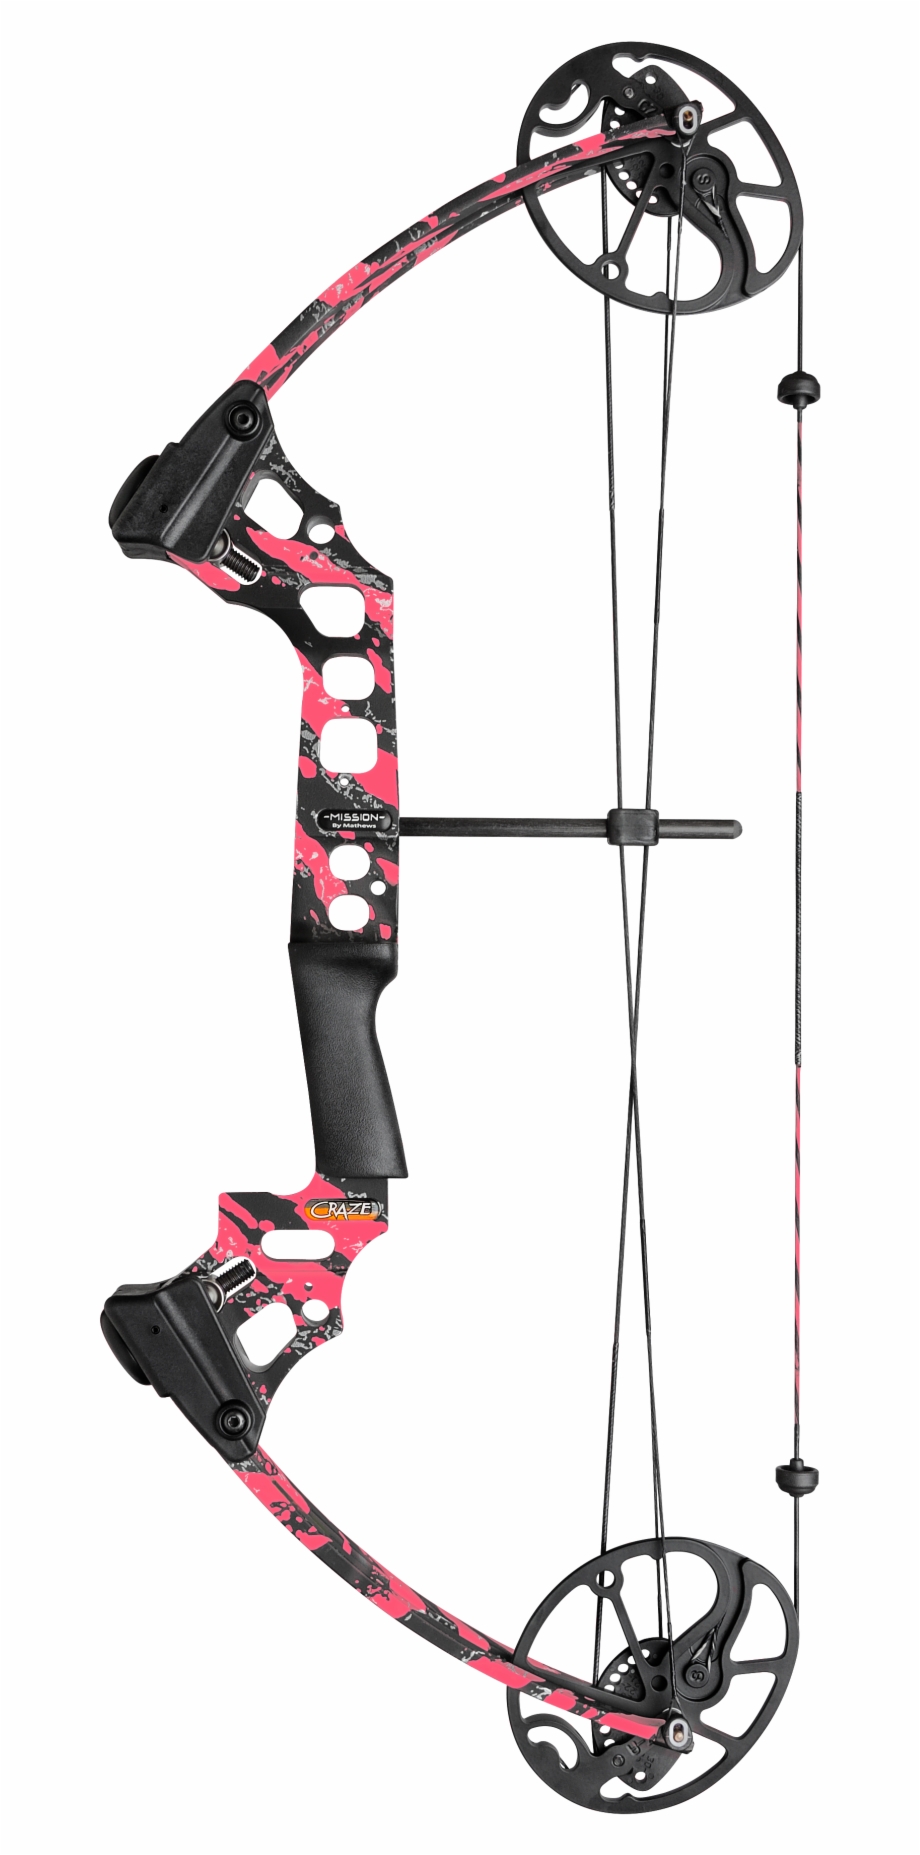 Craze Camo Mission Archery Compact Bow Hunting Gear